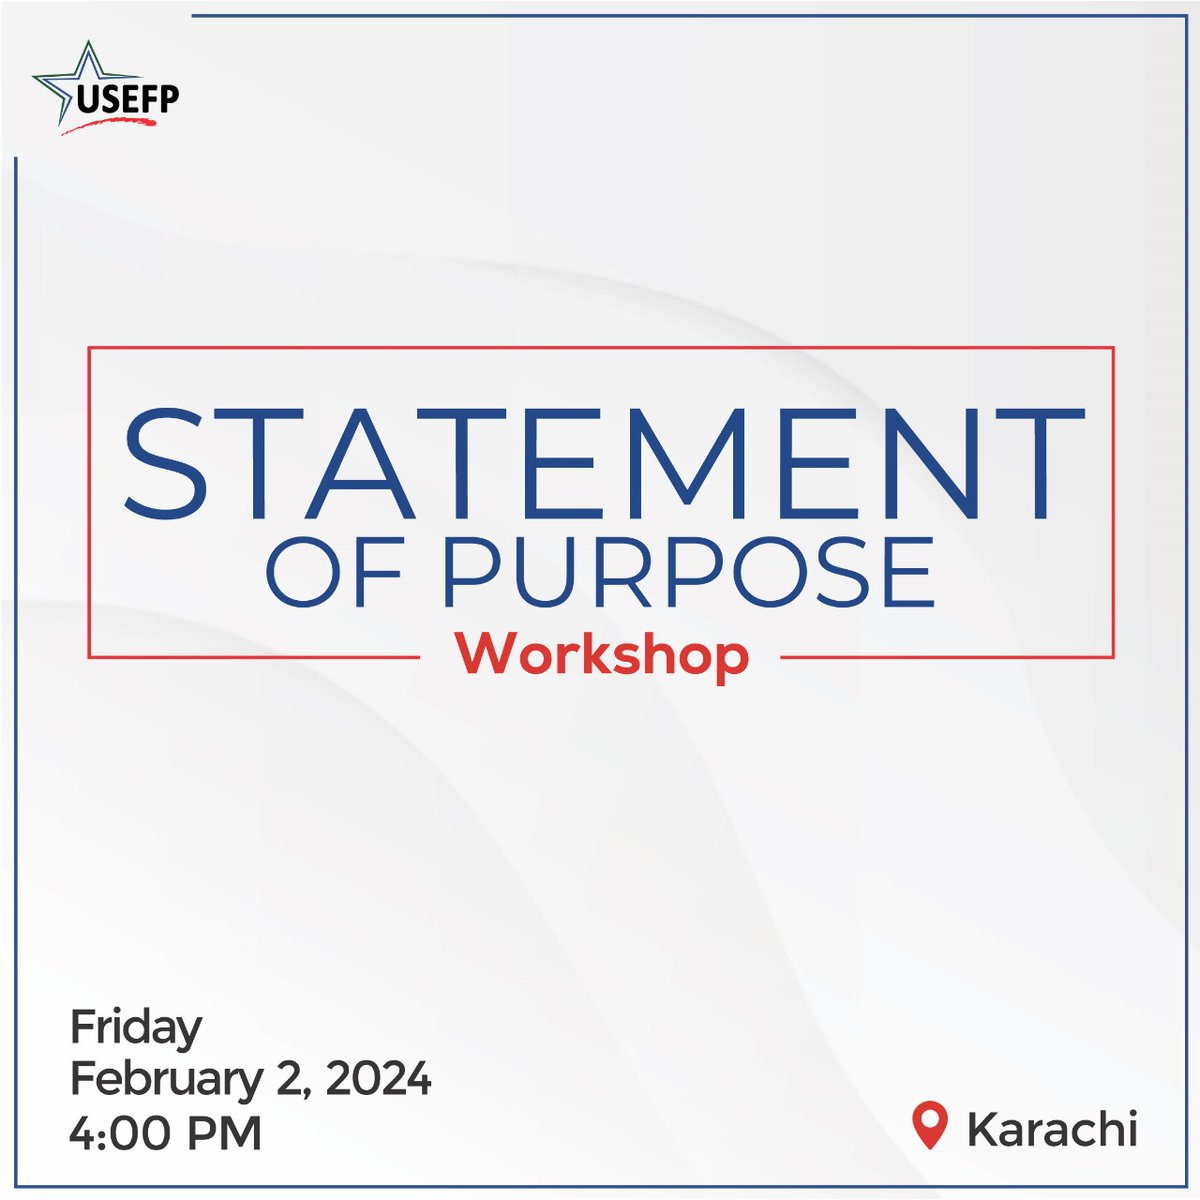 USEFP is organizing two SOP workshops on February 2 in Lahore and Karachi to help applicants draft their essays. Register here ⬇️ For Lahore: educationusa.pk/signup/EventDe… For Karachi: educationusa.pk/signup/EventDe… #USEFP #Fulbright #SOP #StudyInUSA #HigherEducation #USPAK